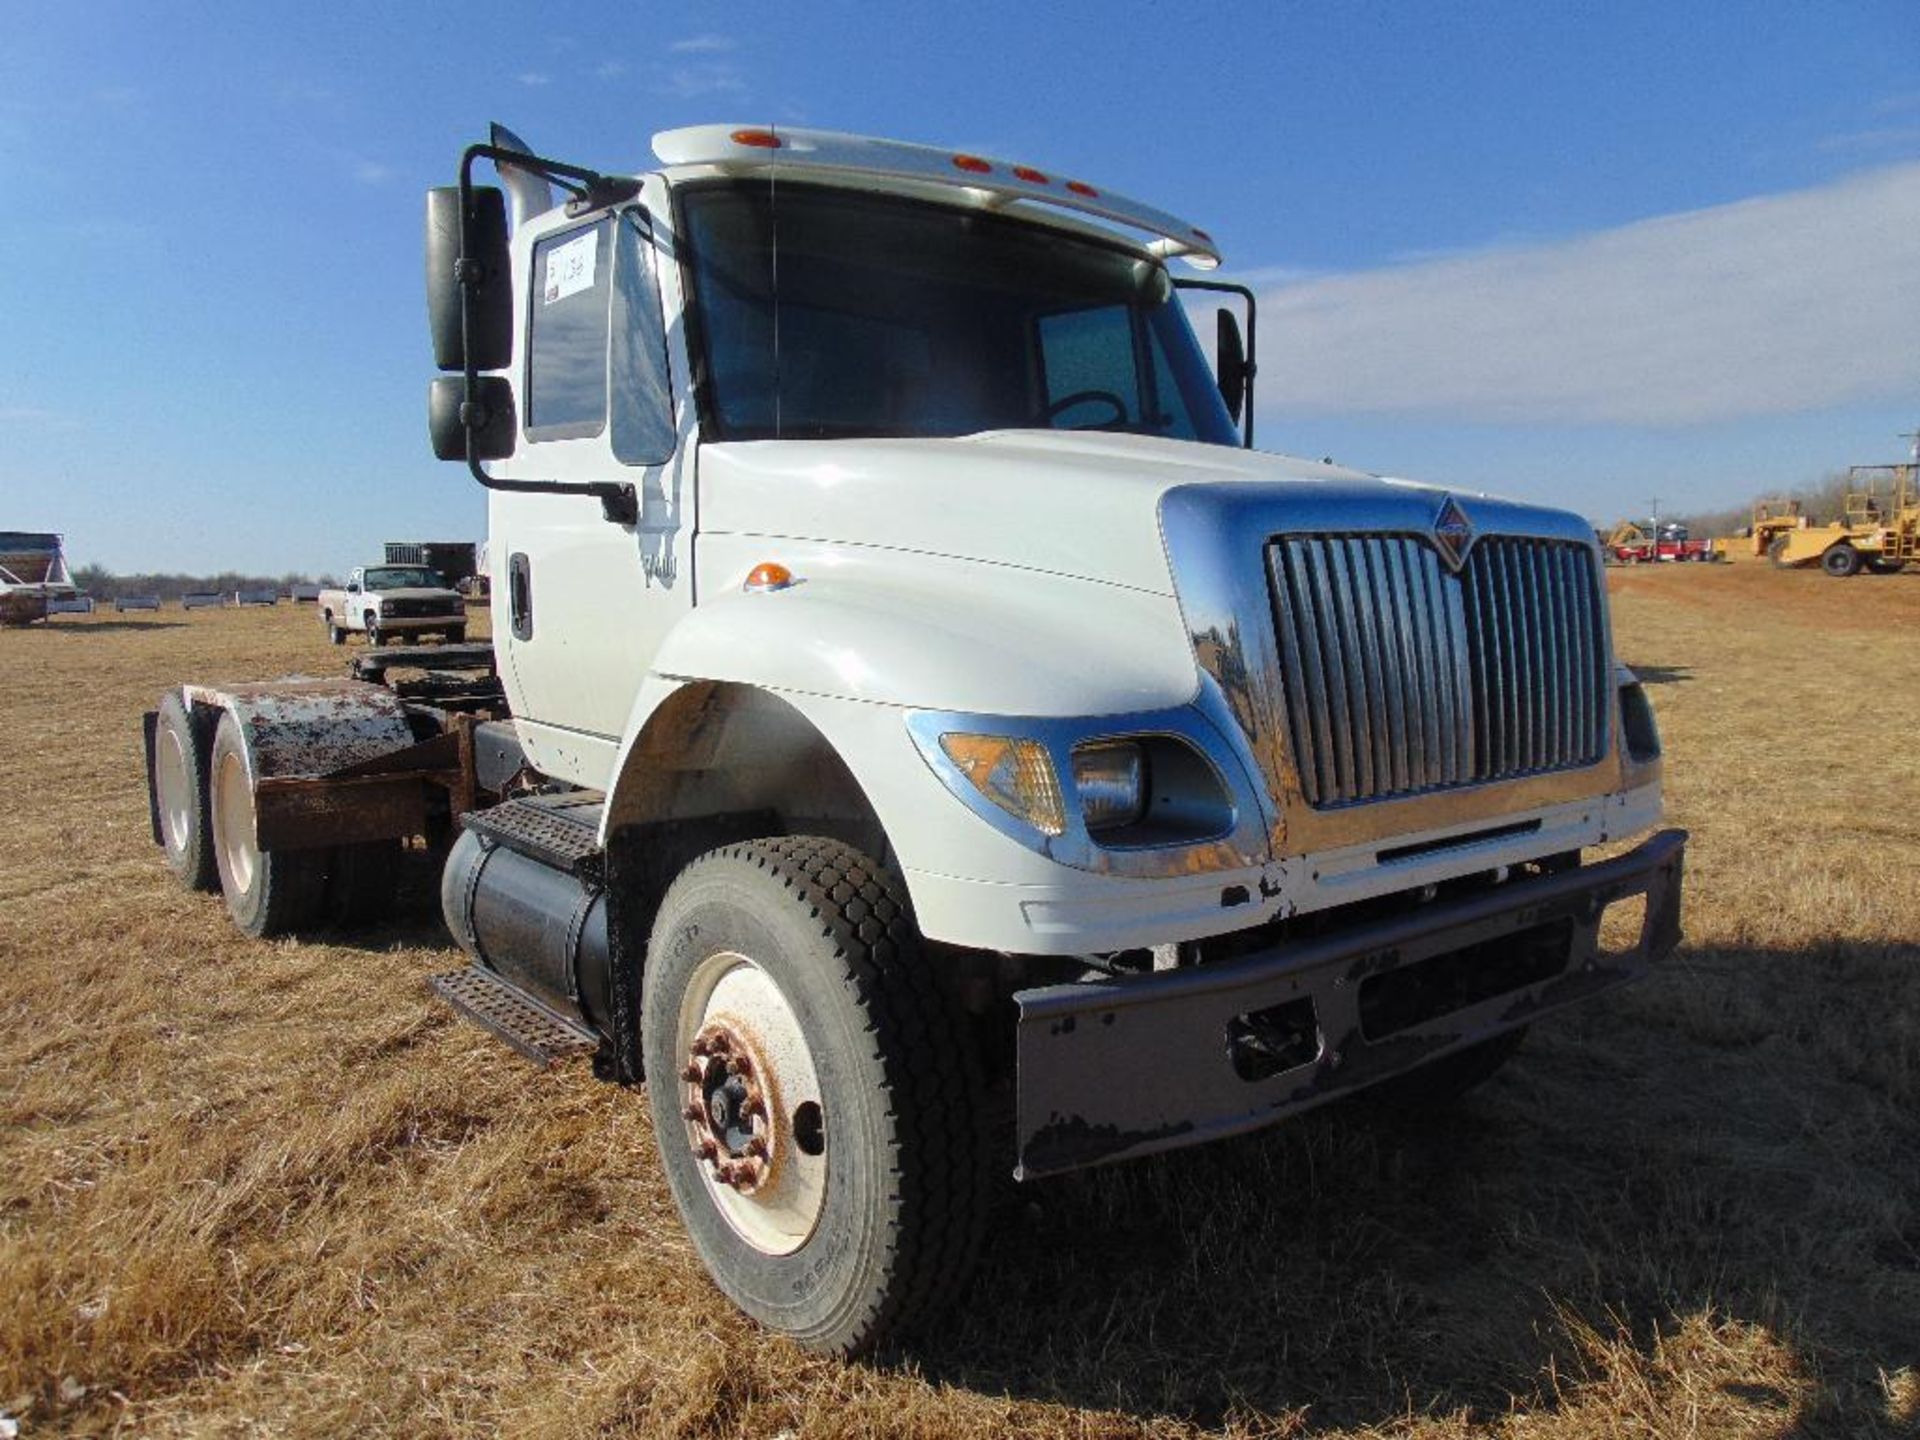 2005 IHC 7600 T/A Truck Tractor, s/n 1hswysbr065235647, cat c 13 eng, 10 spd trans, od reads 209294 - Image 2 of 10